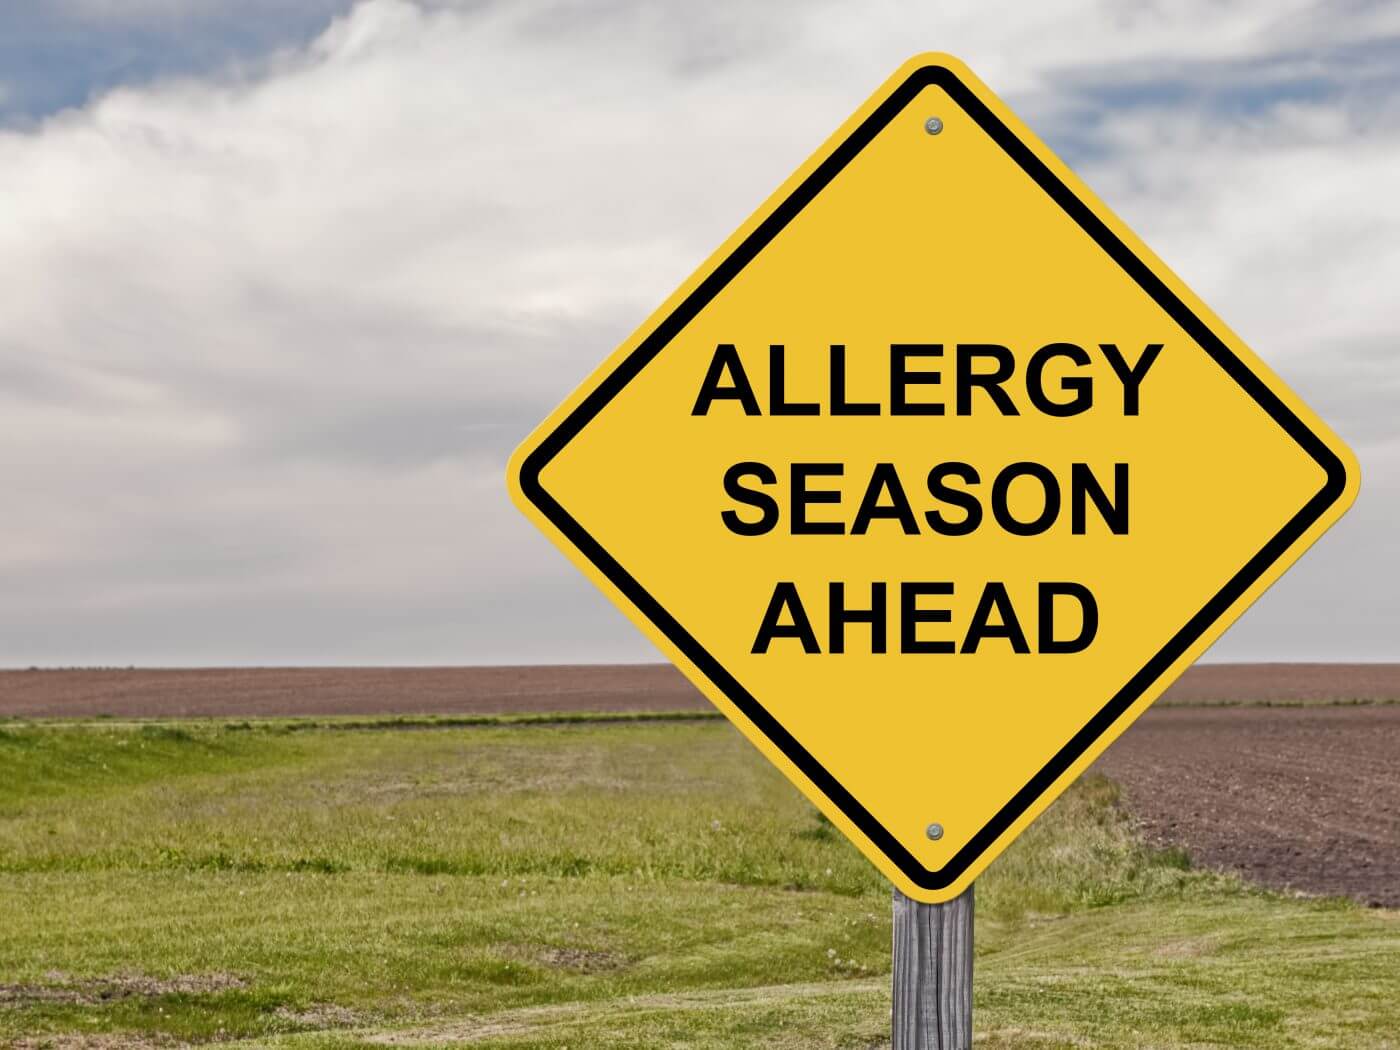 Pests and Spring Allergies